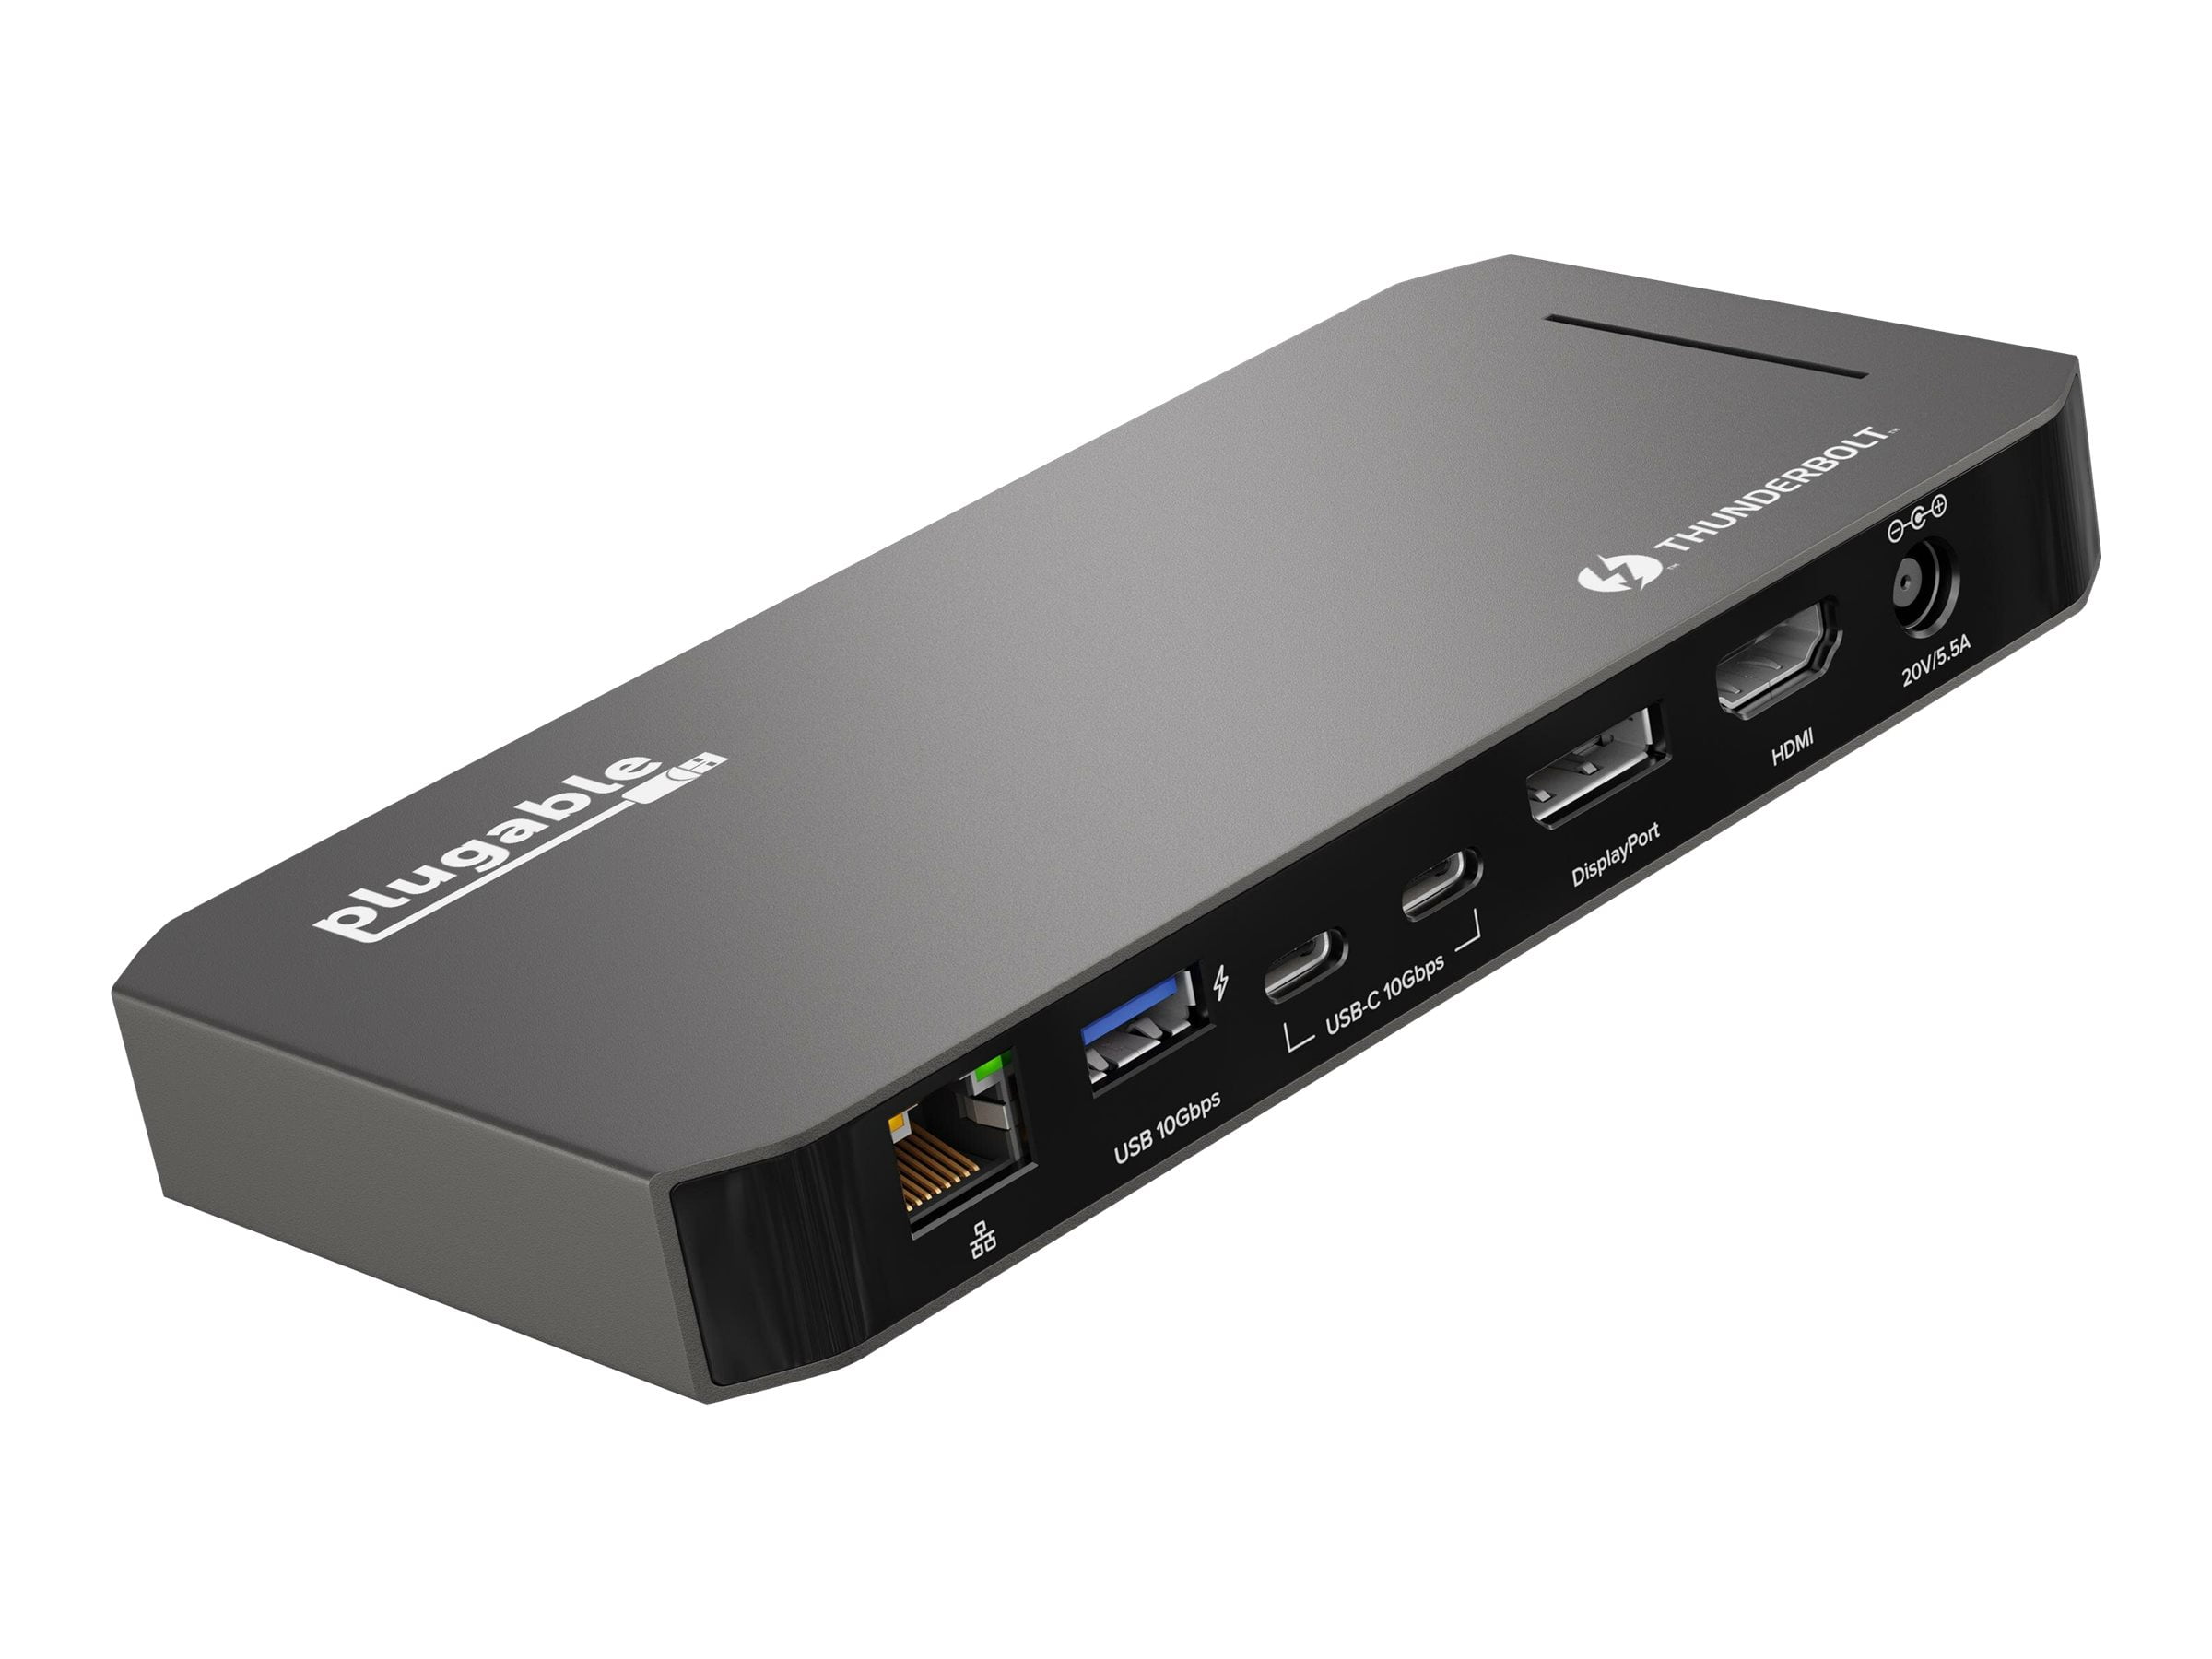 Plugable USB-C and Thunderbolt Dock 40Gbps with 96W Charging, Compatible with Mac and Windows Laptops, DisplayPort and HDMI, 2x USB-C, 3x USB 3.0, Gigabit Ethernet, Audio Jack - Walmart.com